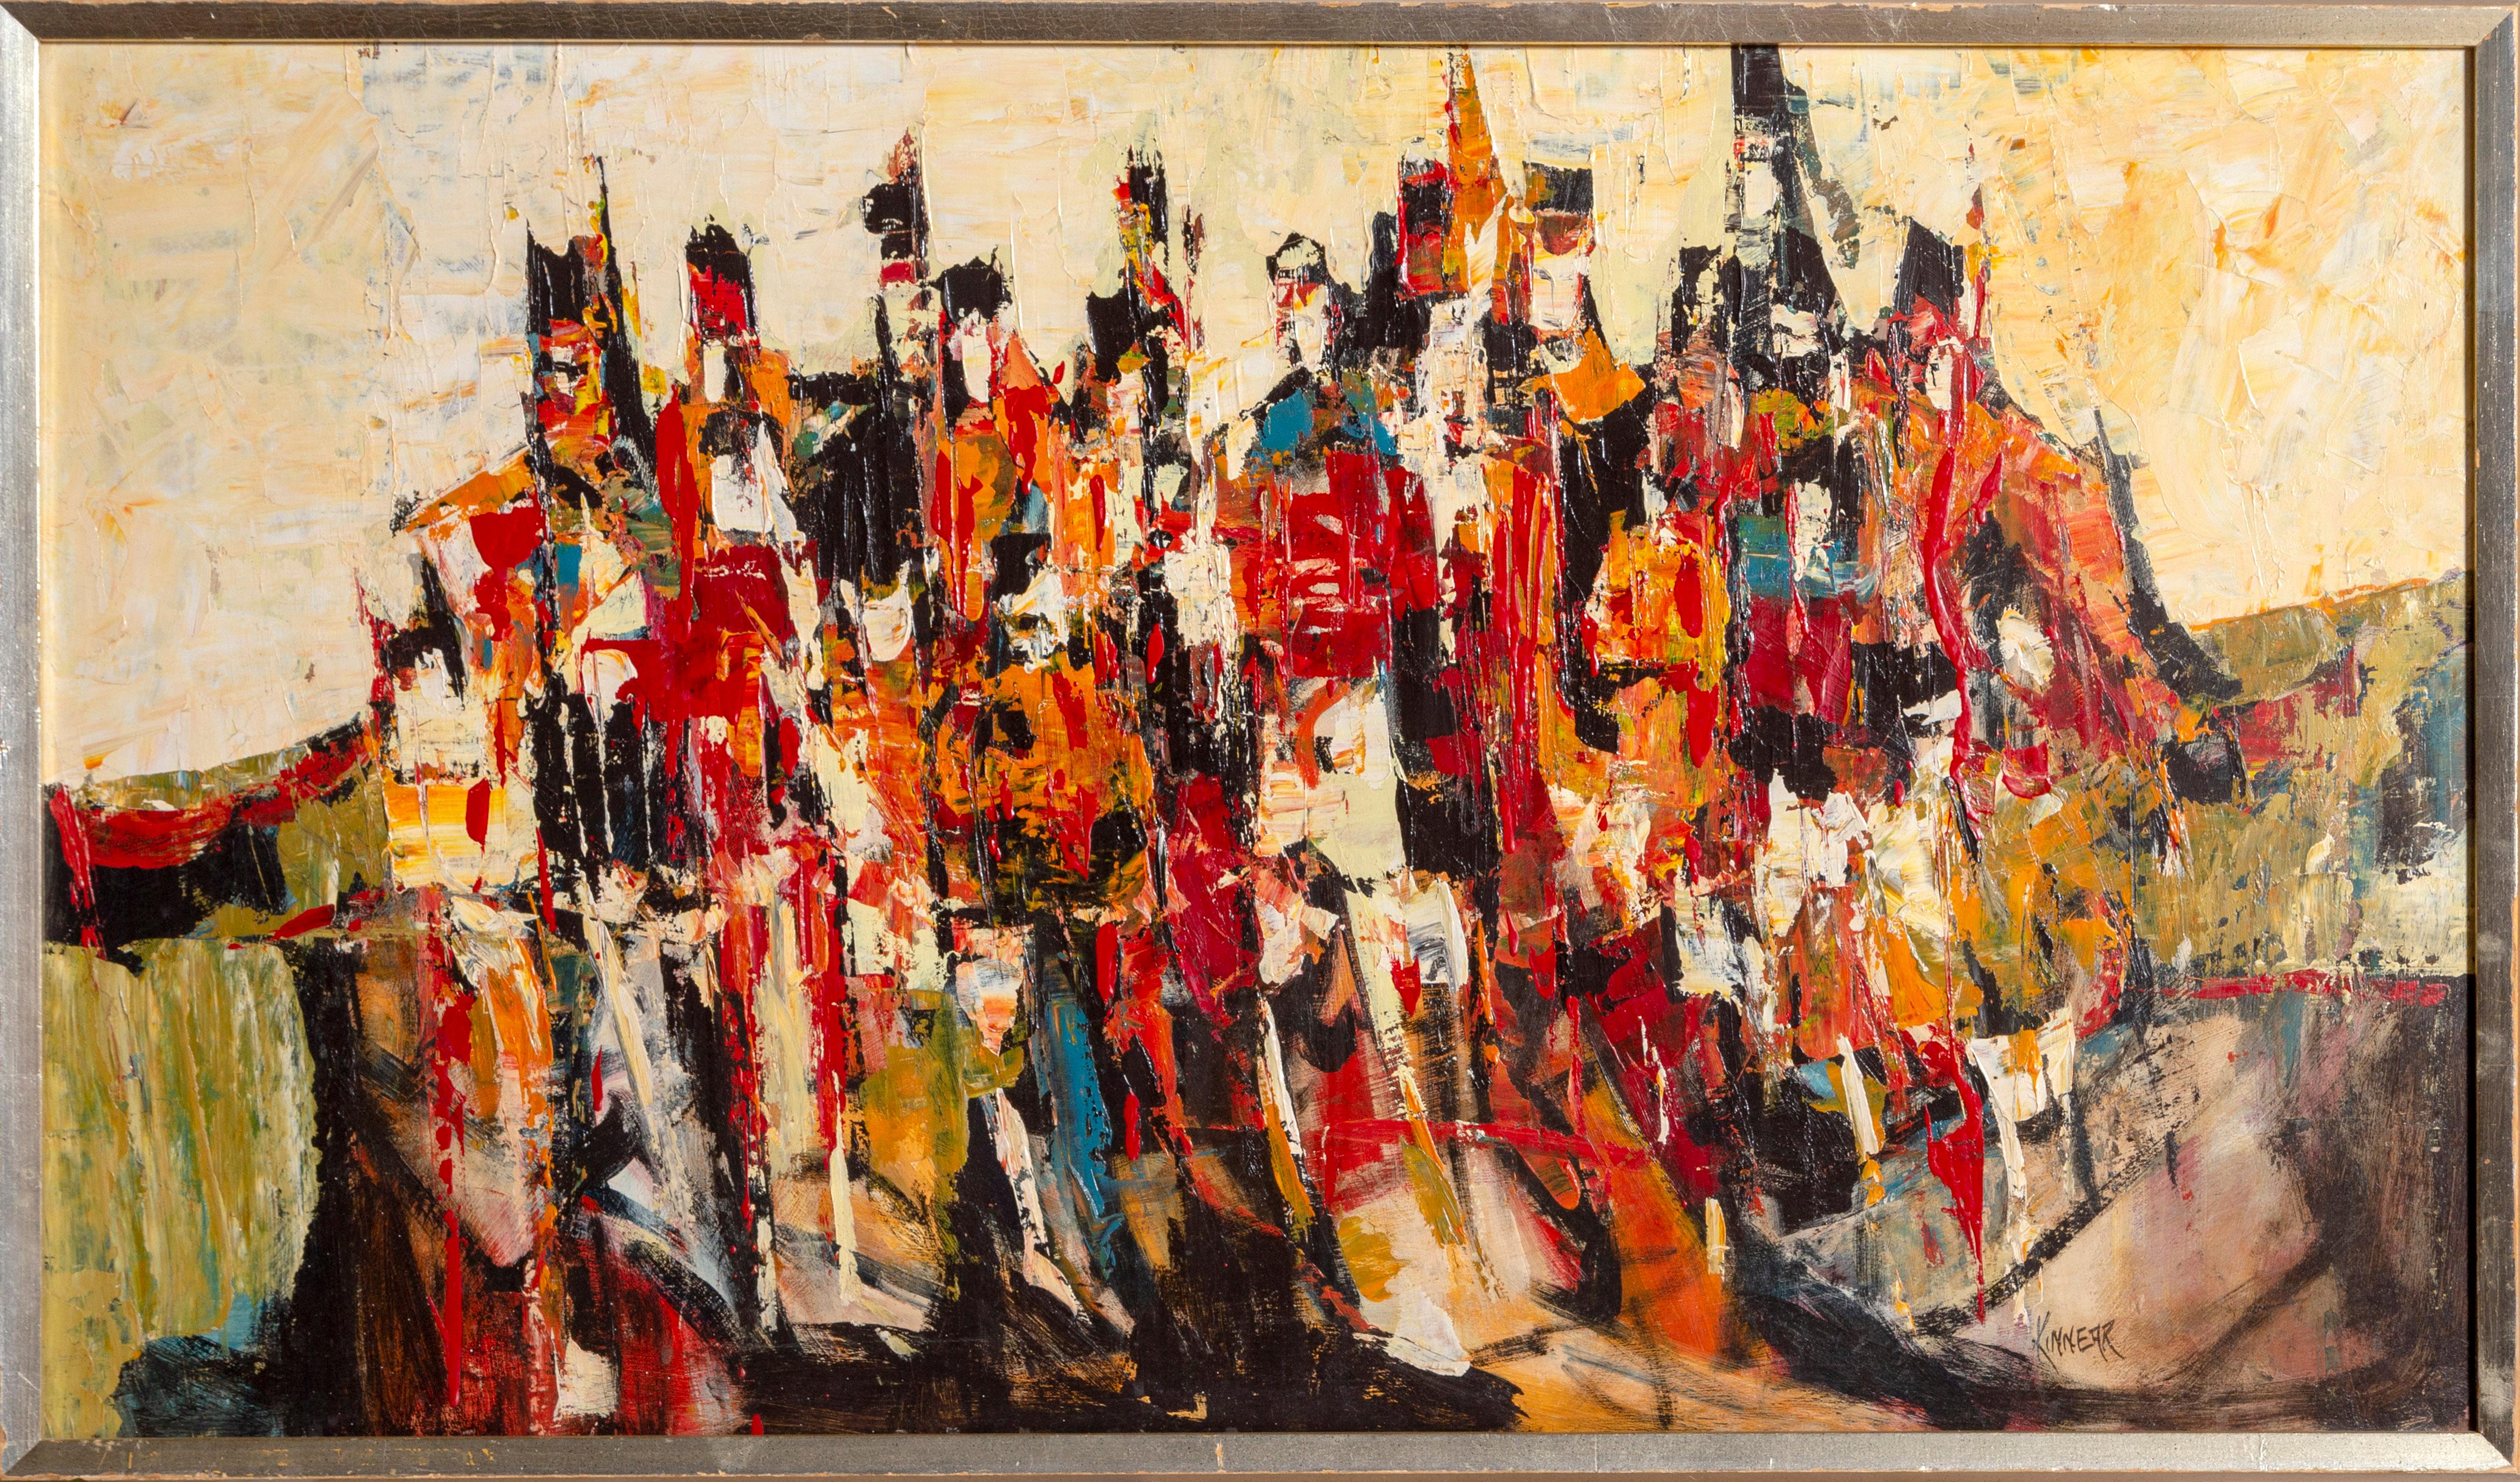 Highland Figures, Abstract Expressionist Painting by John Kinnear c1960